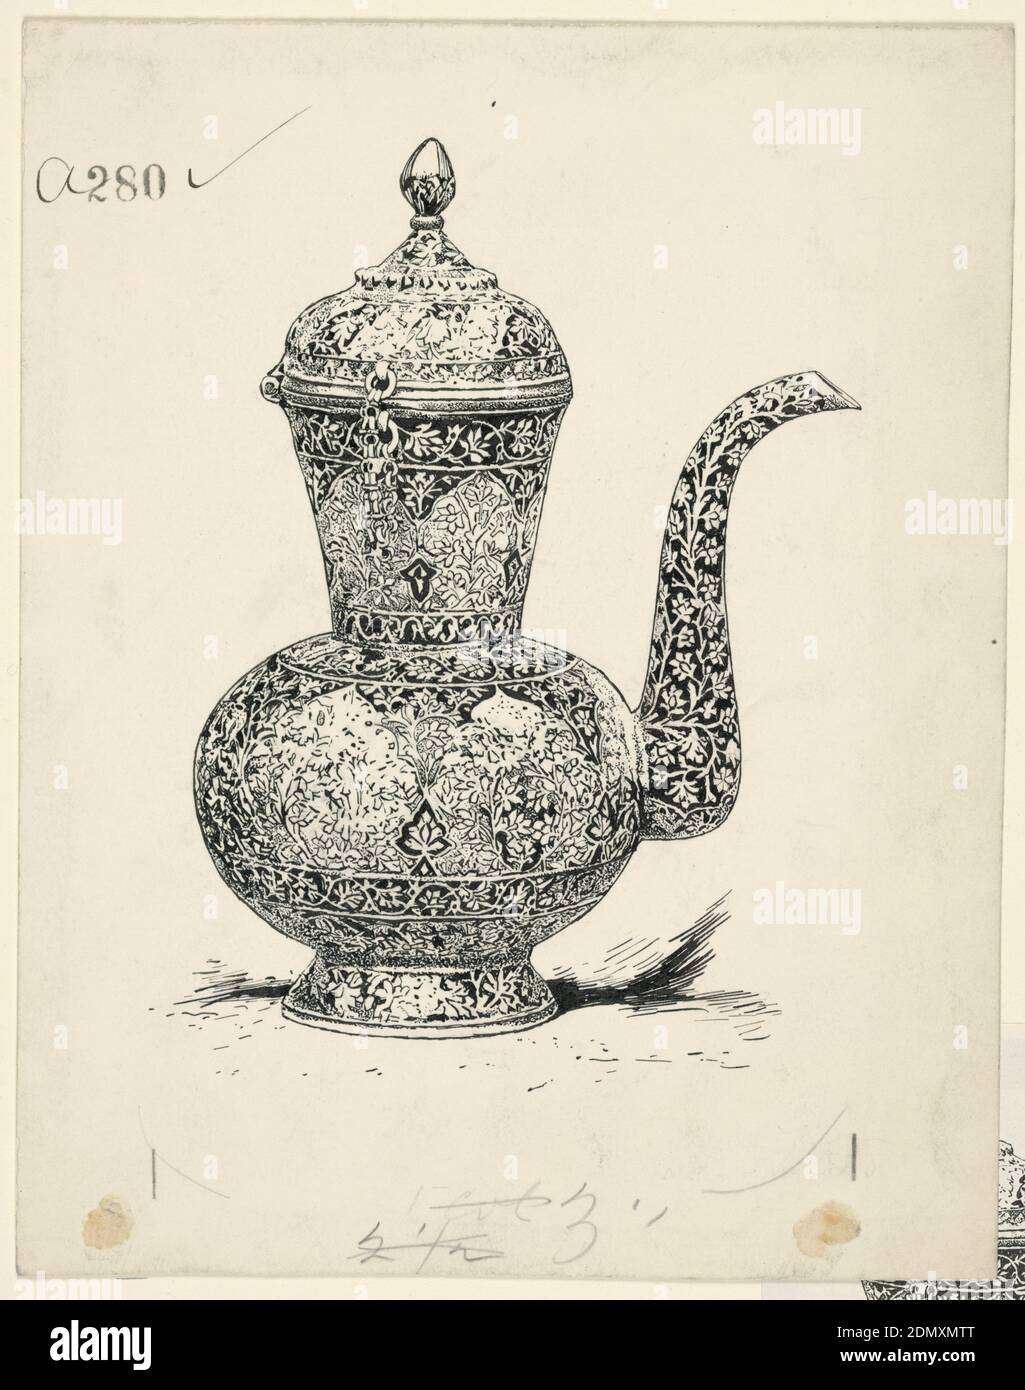 Ewer of Solid Silver made at Ispahan, Pen and black ink on paperboard, A ewer seen from the side. The entire surface is covered with bands of floral ornament., USA, 1886, graphic design, Drawing Stock Photo